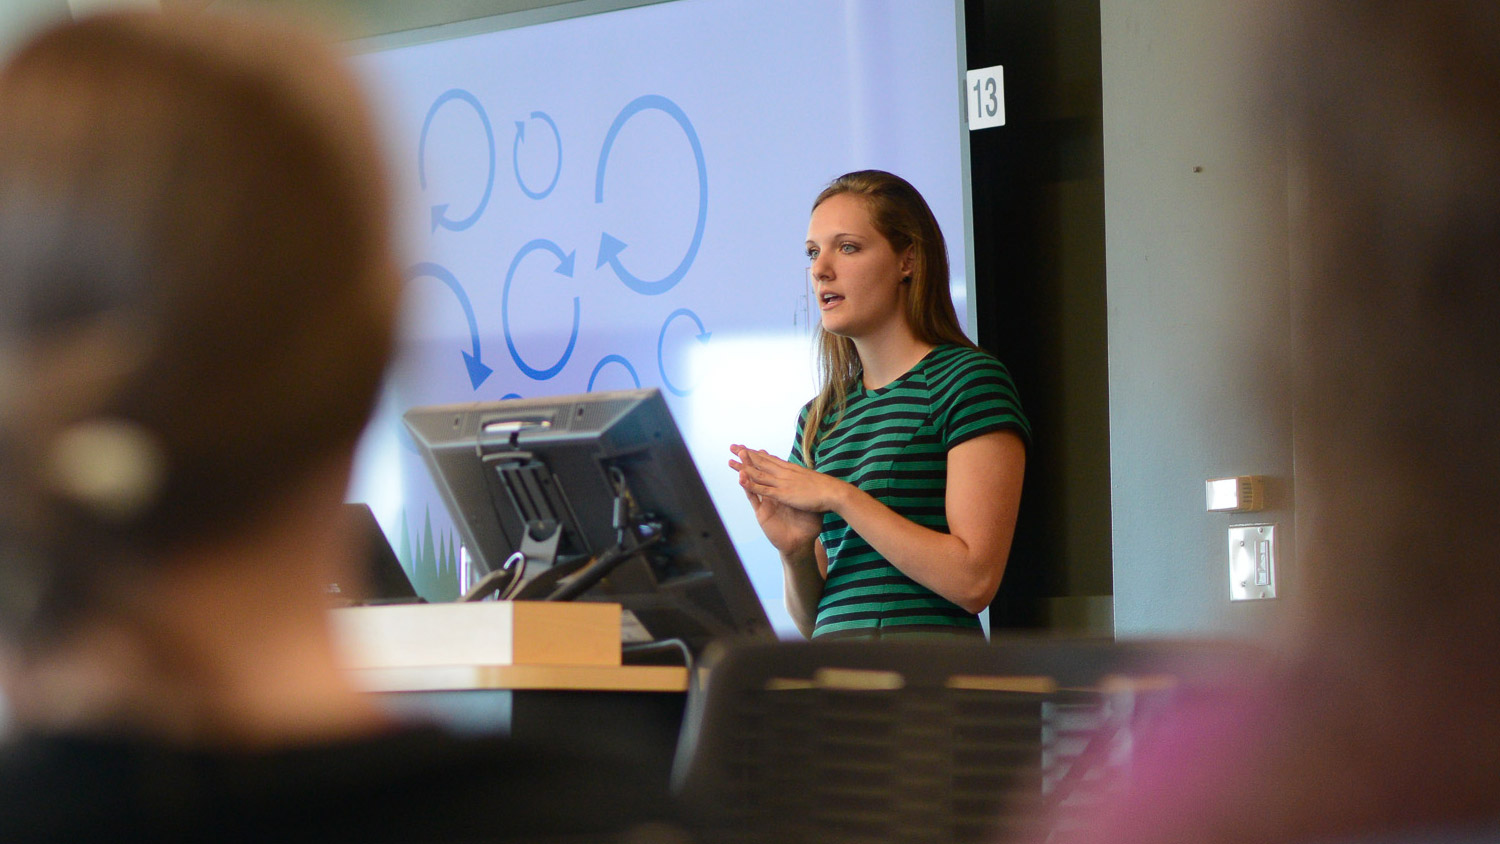 A photo of a woman giving a presentation at the North Carolina State University Center for Geospatial Analytics